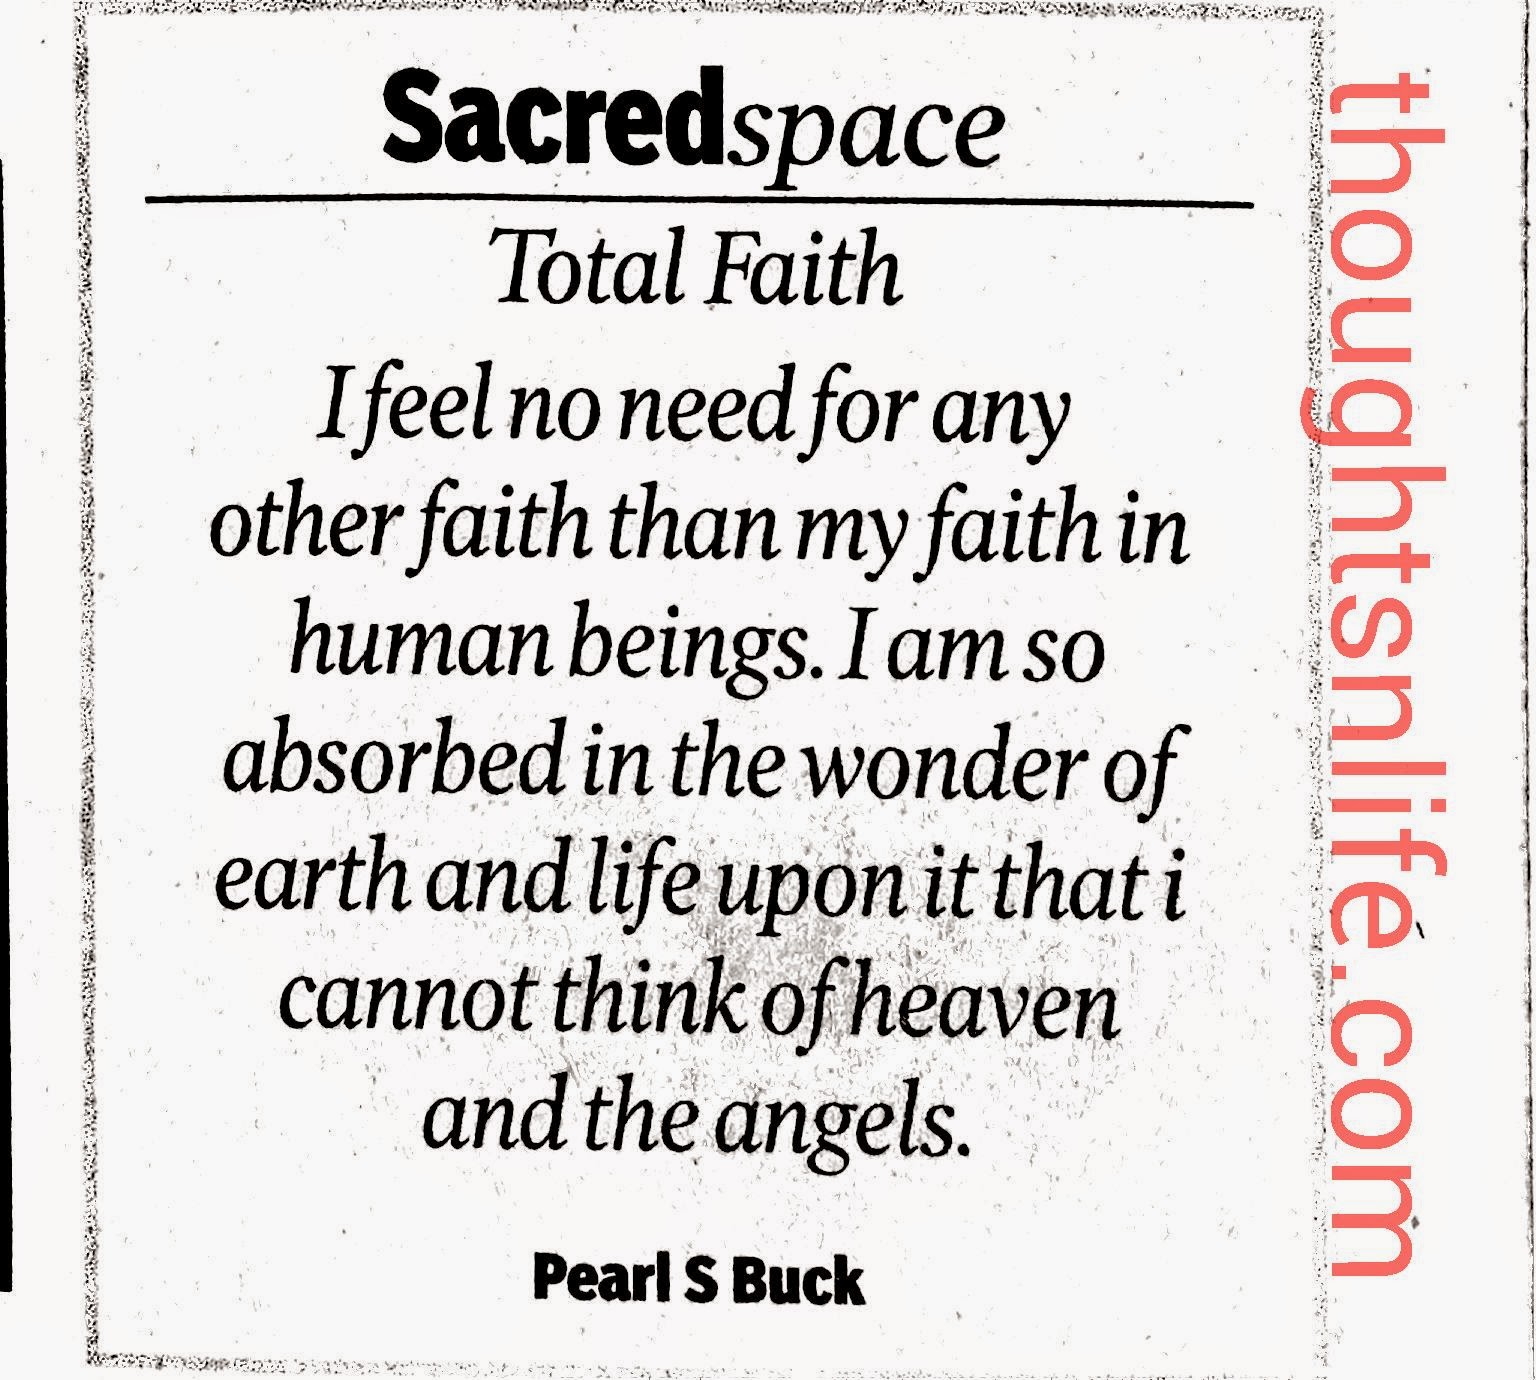 Thoughtsnlife.com:Total Faith - I feel no need for any other faith than my faith in human beings. I am so absorbed in the wonder of earth and life upon it that i cannot think of heaven and angels. ~ Pearl S Buck